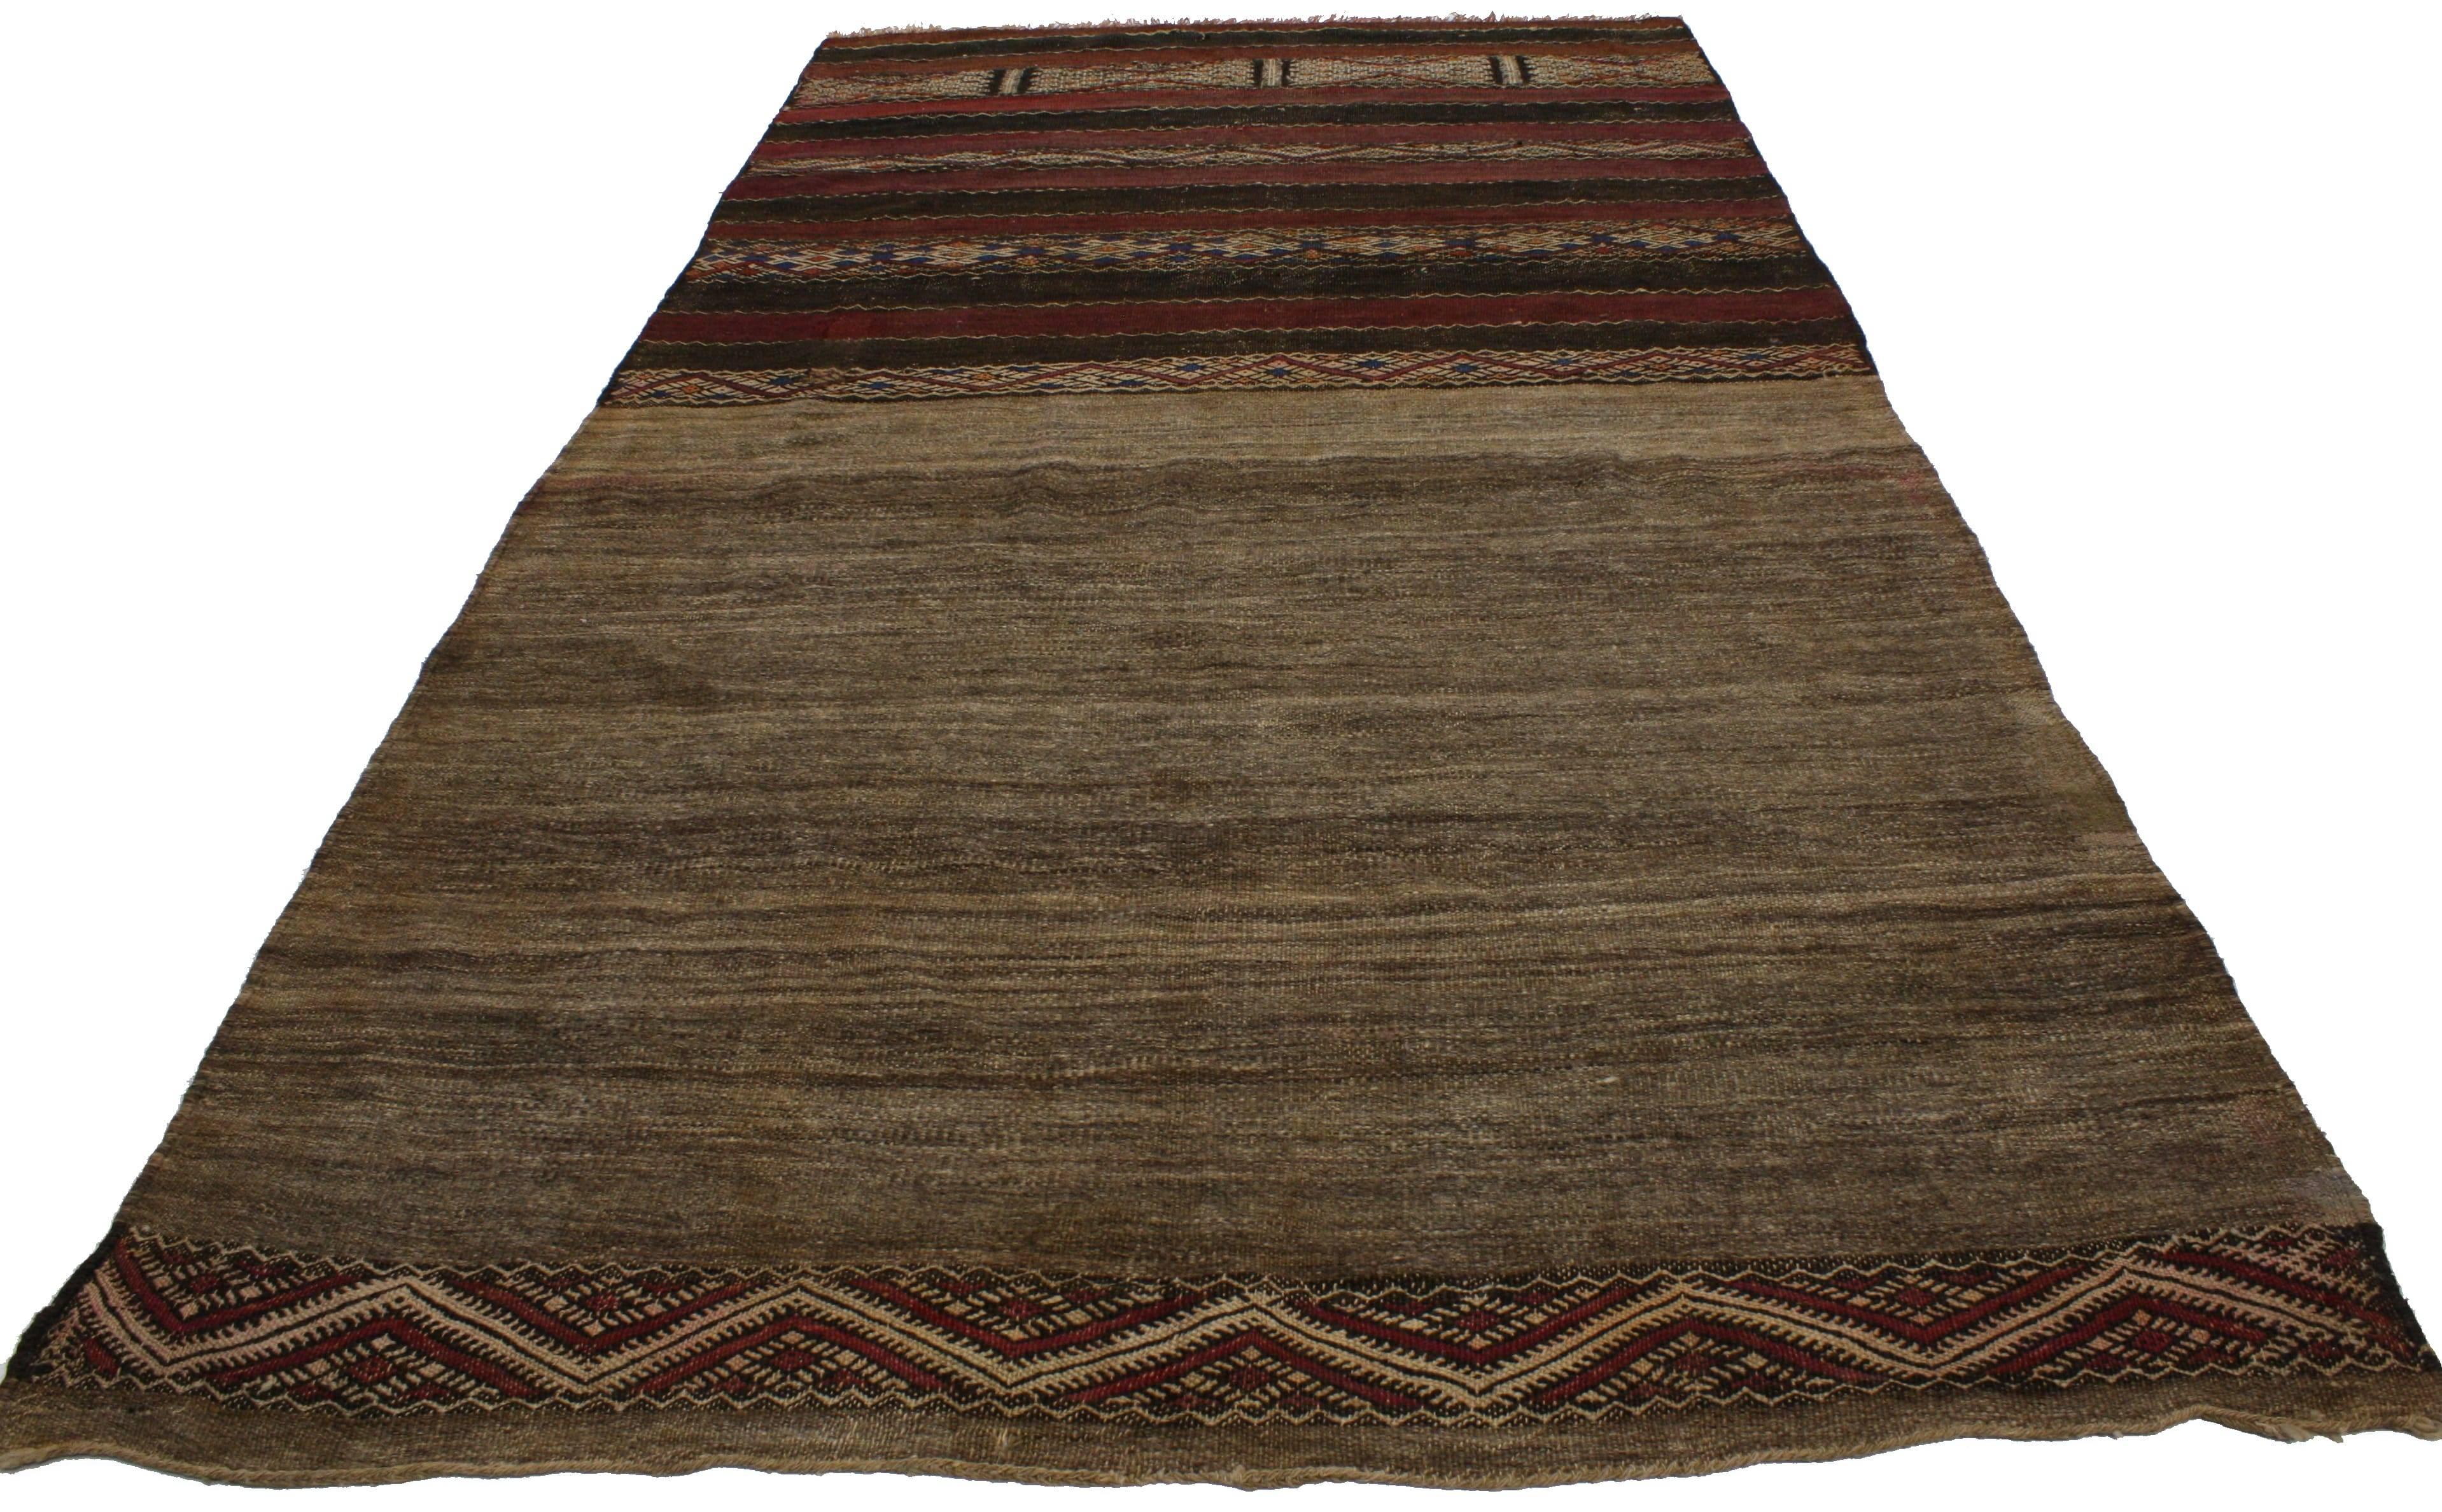 20216, vintage Berber Moroccan Kilim rug, flat-weave tribal rug. Dark and rich earth tones provide a beautiful color scheme for the design featured on this vintage Berber Moroccan Kilim rug. This piece is rich in ancient Berber culture, as the